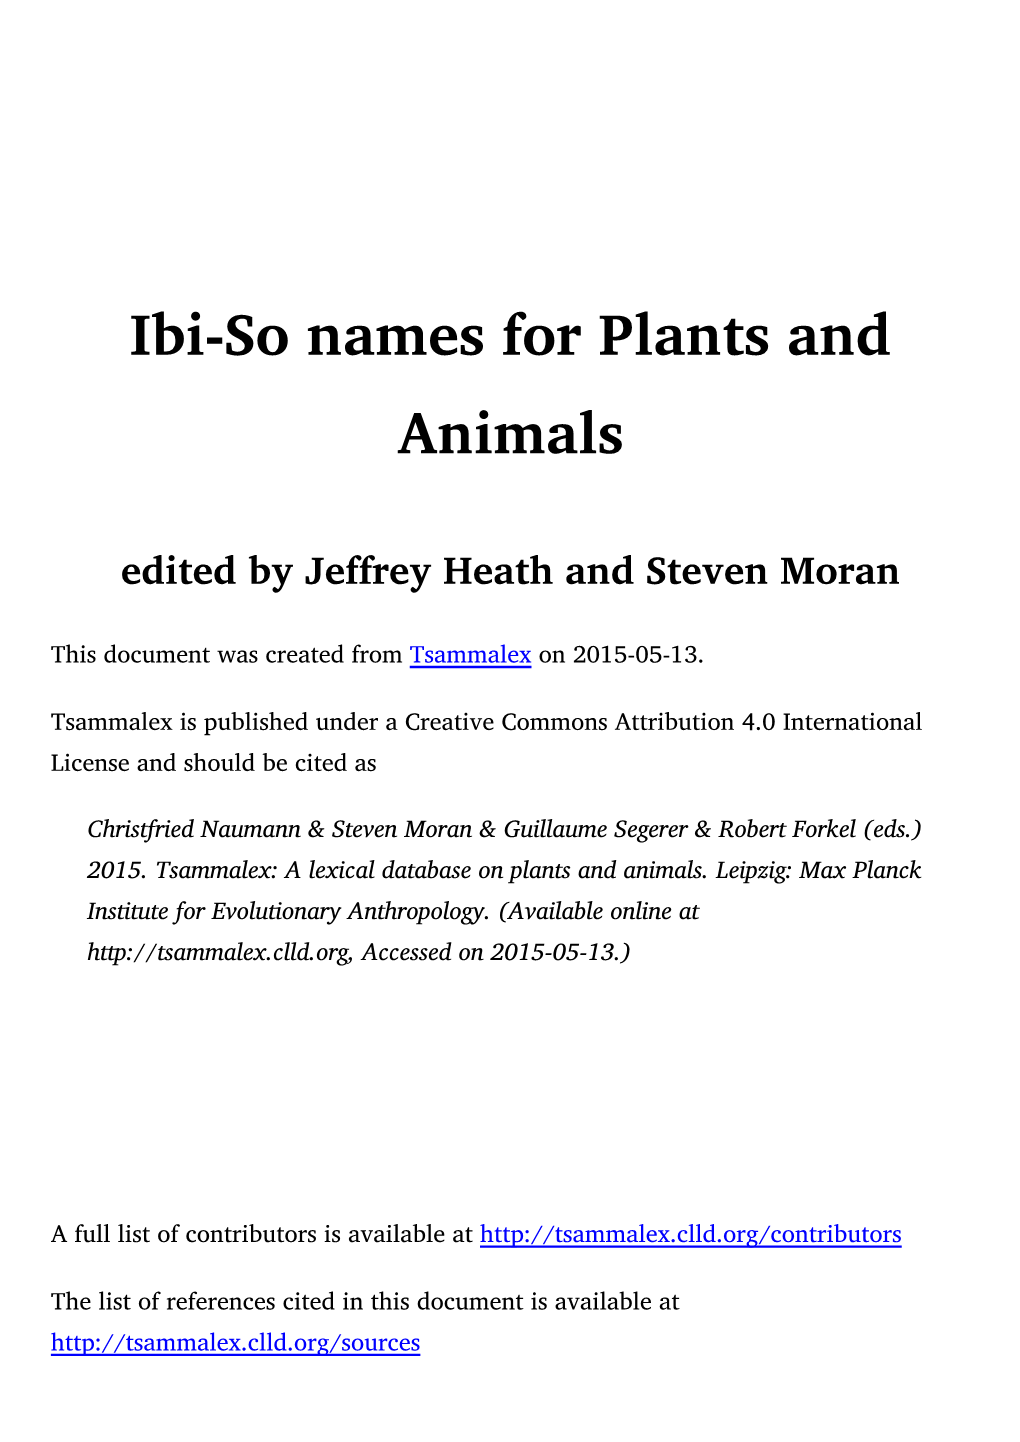 Ibi-So Names for Plants and Animals